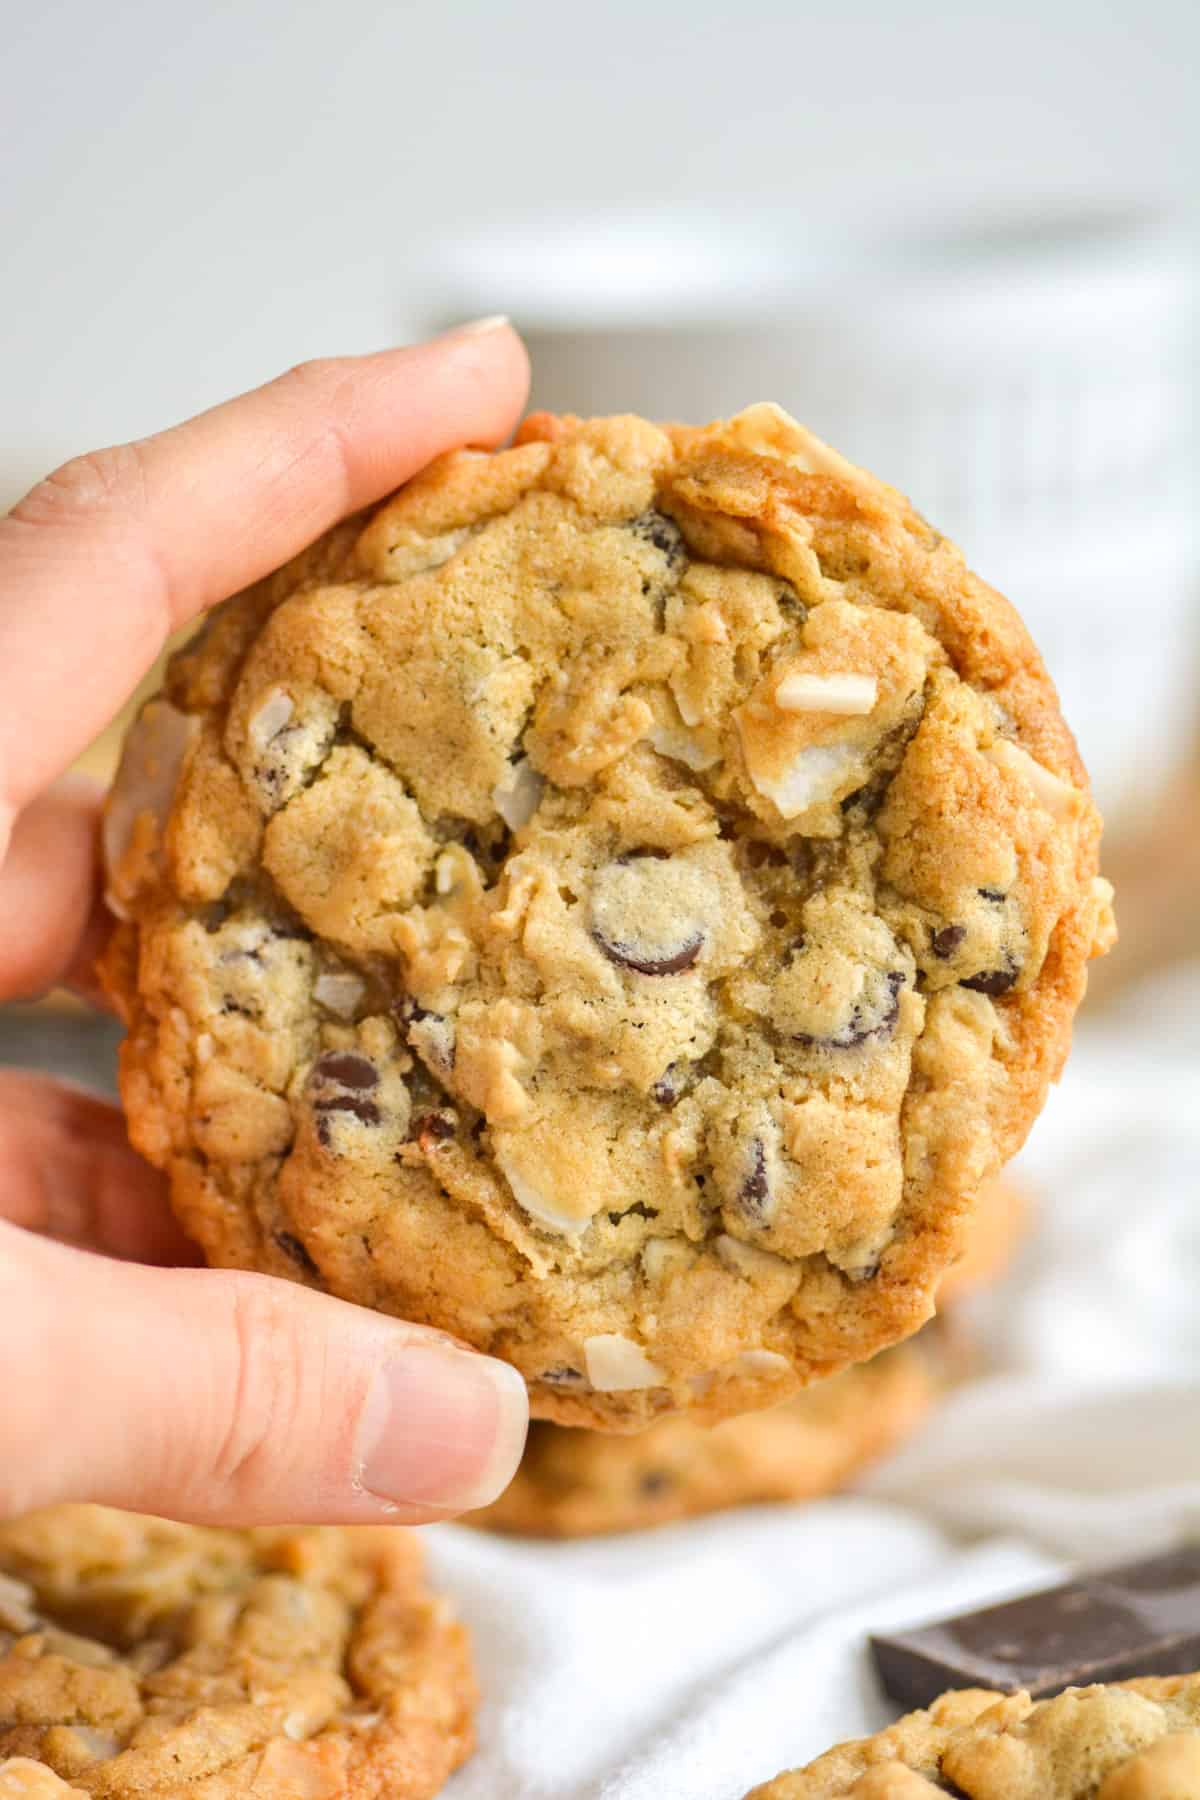 Hand holding a vegan oatmeal coconut chocolate chip cookie.